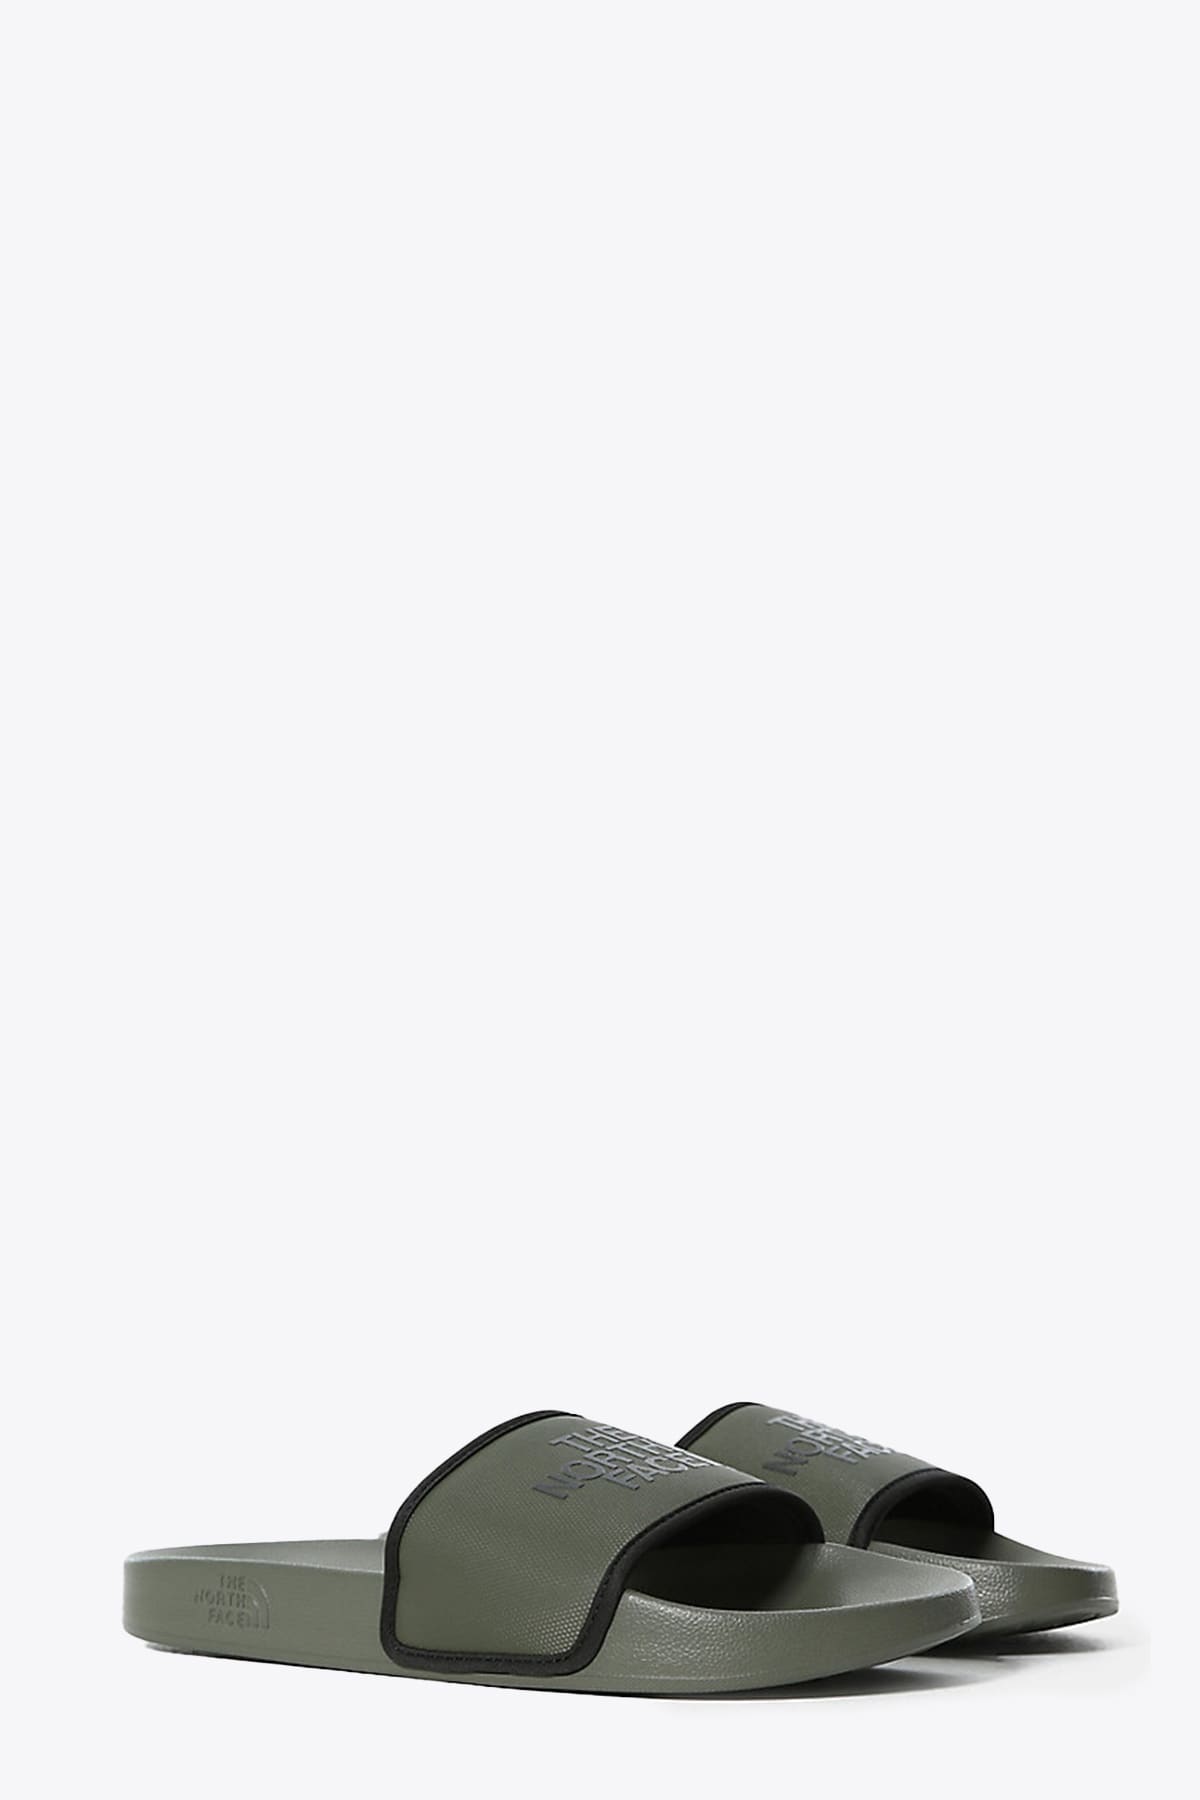 The North Face M Base Camp Slide Iii New Taupe Military green rubber slides with logo - Base camp slide III